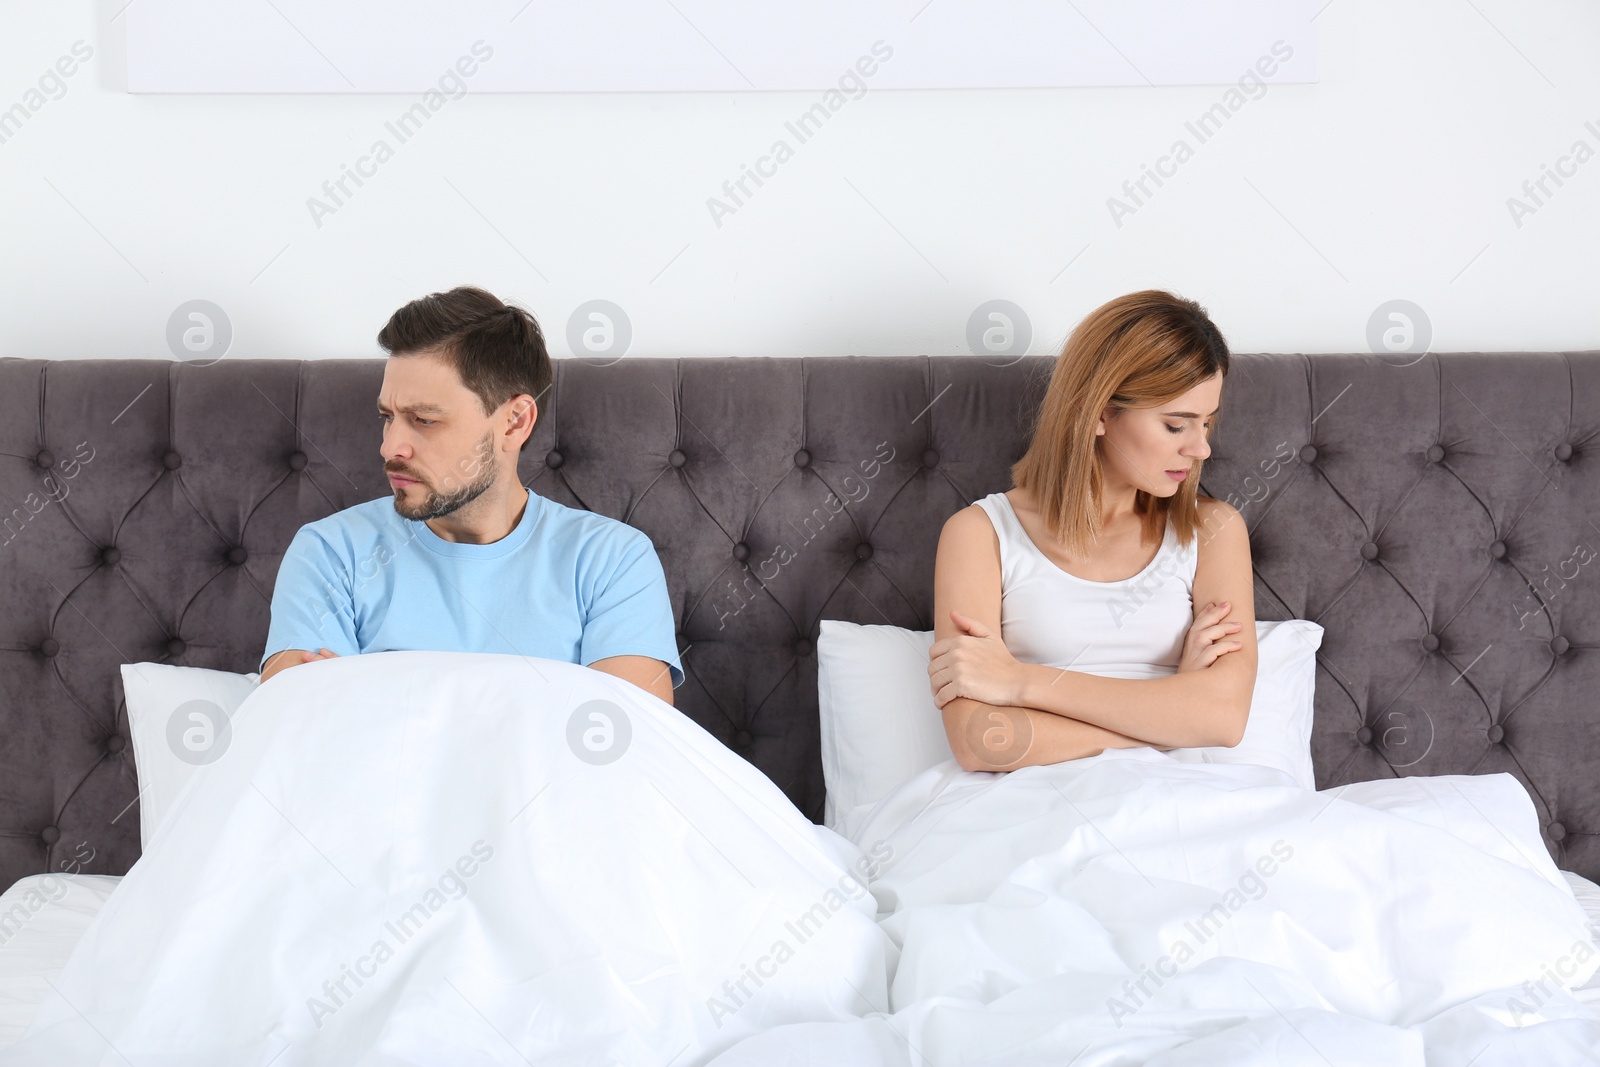 Photo of Couple with relationship problems ignoring each other in bedroom